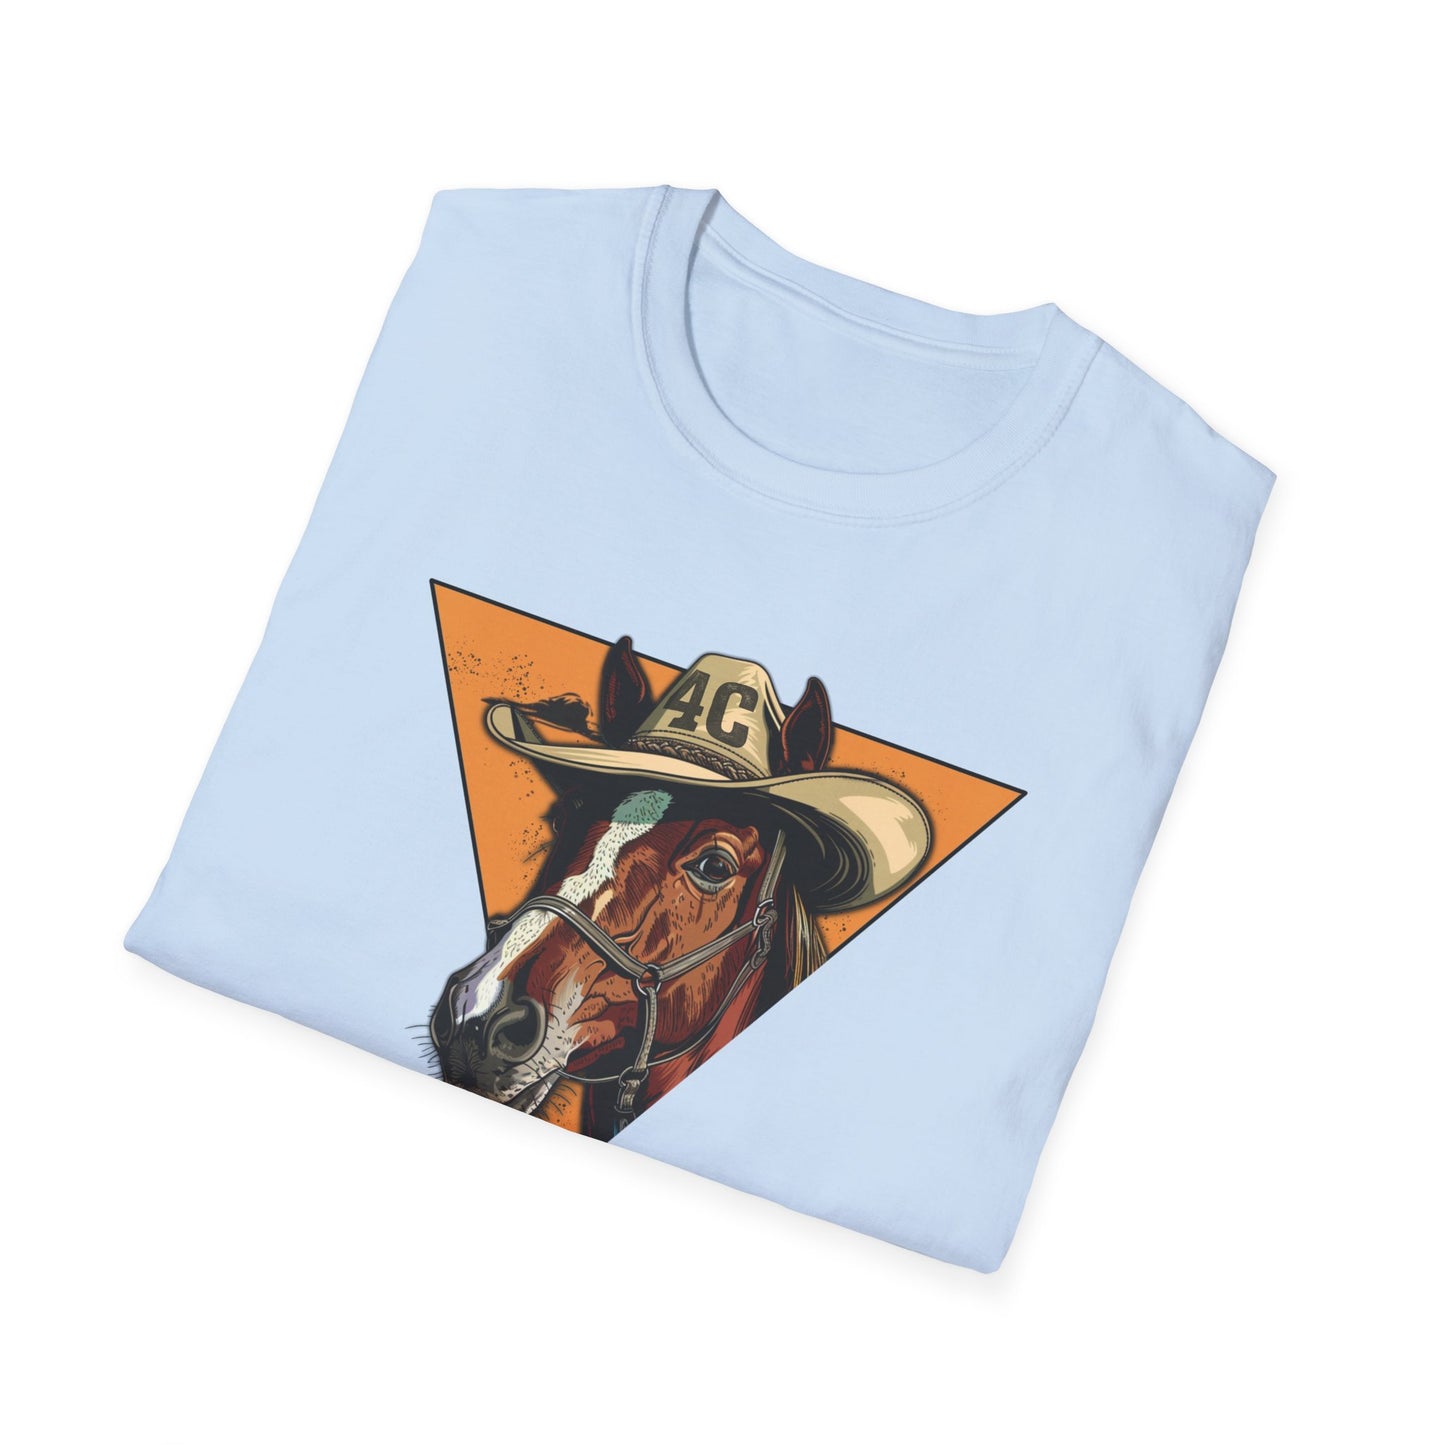 4C Horse With Hat Shirt